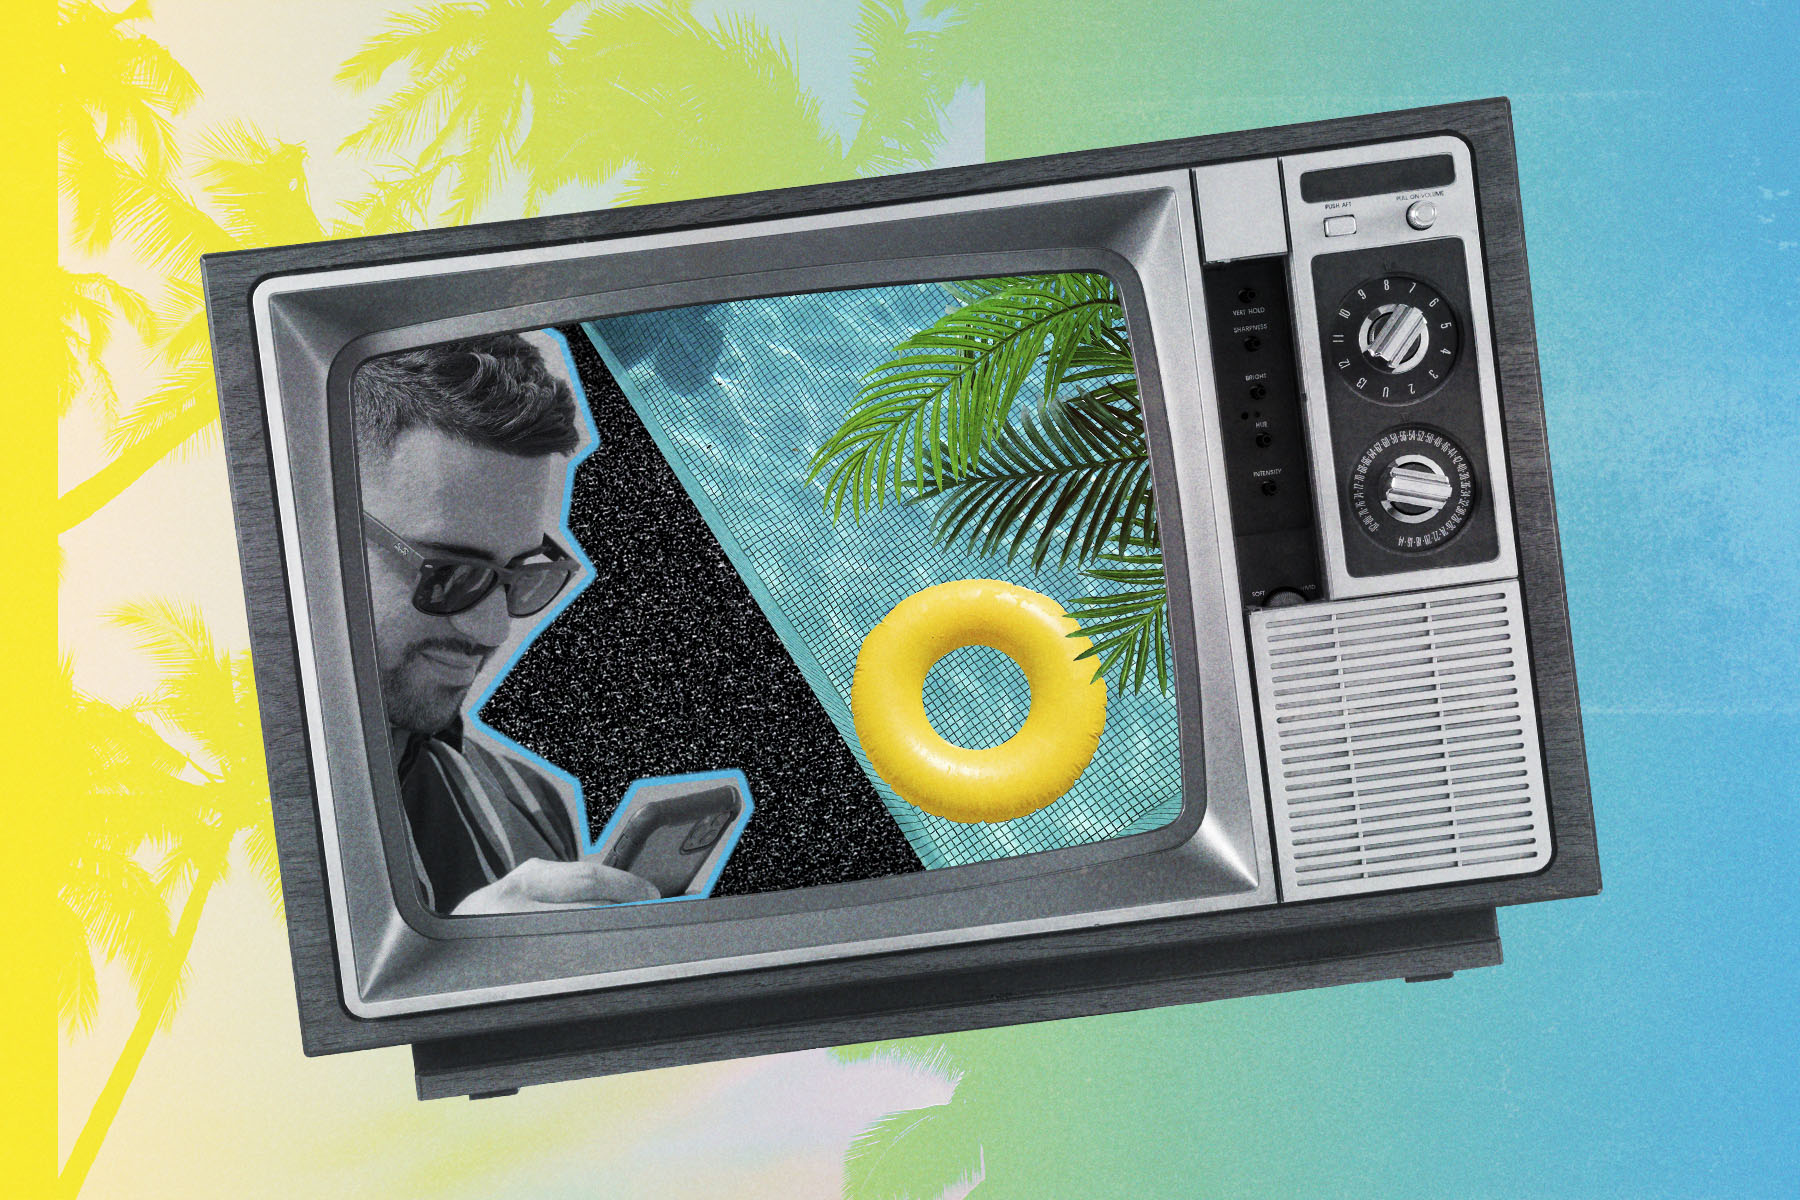 An illustration of a television on a yellow and blue background with a rubber ring and a man checking his phone